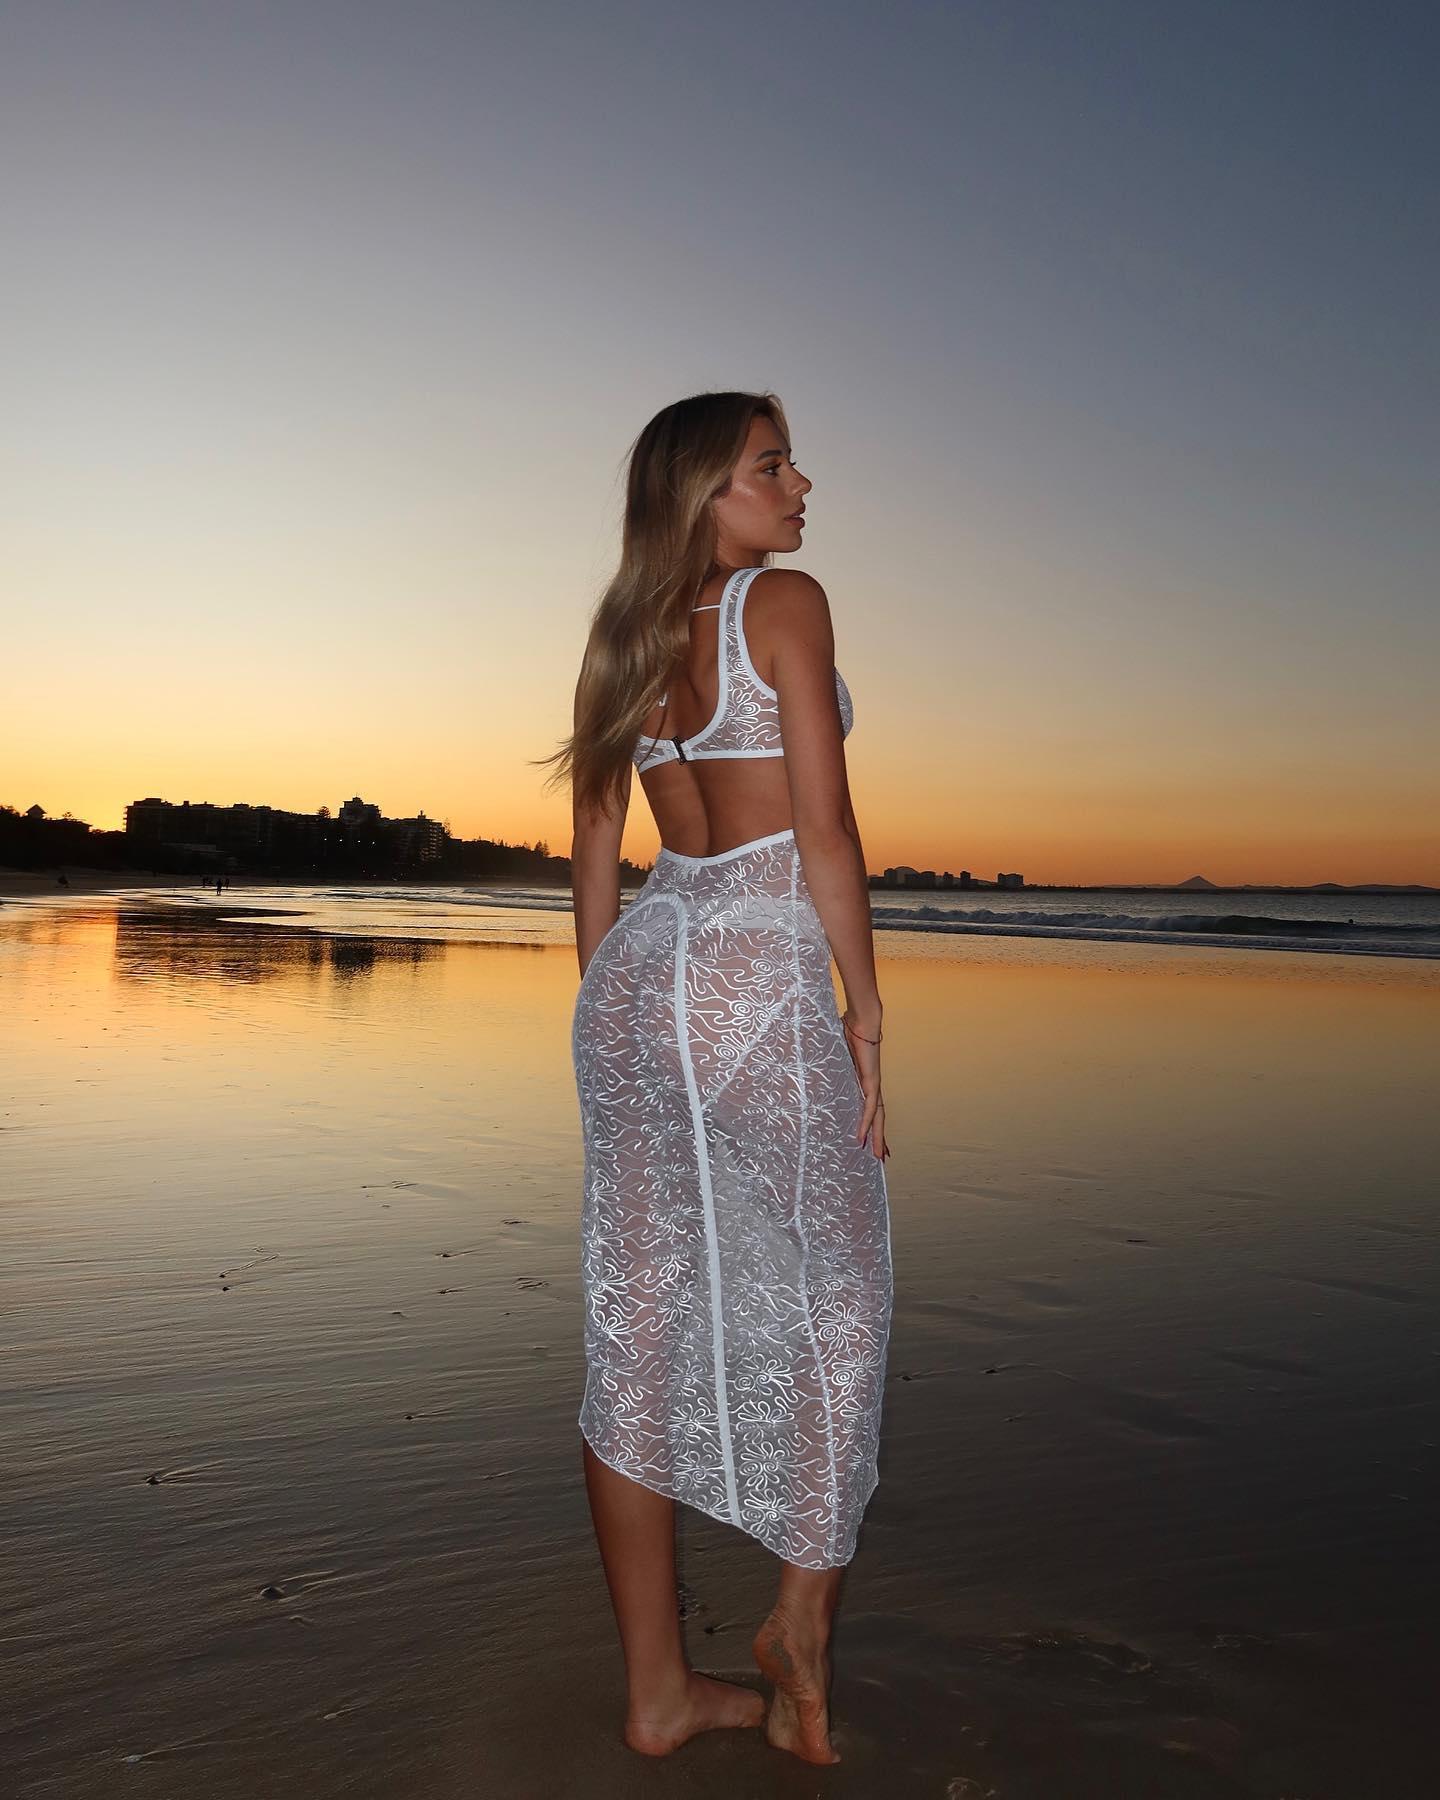 Georgia Hassarati Hits The Beach At Sunset In A See-Through Dress